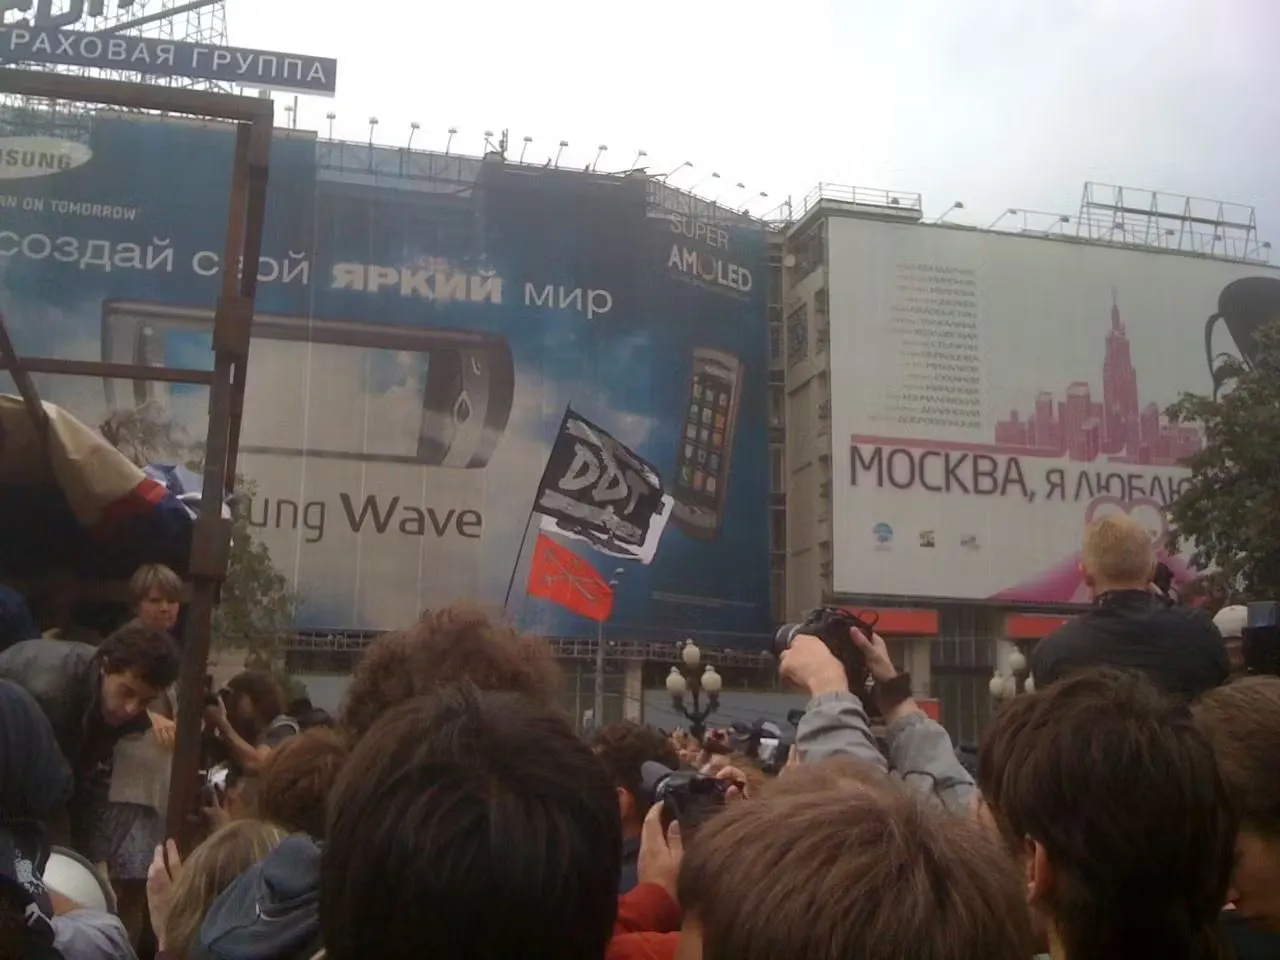 "Strategy 31" meeting on Pushkin Square in 2011.